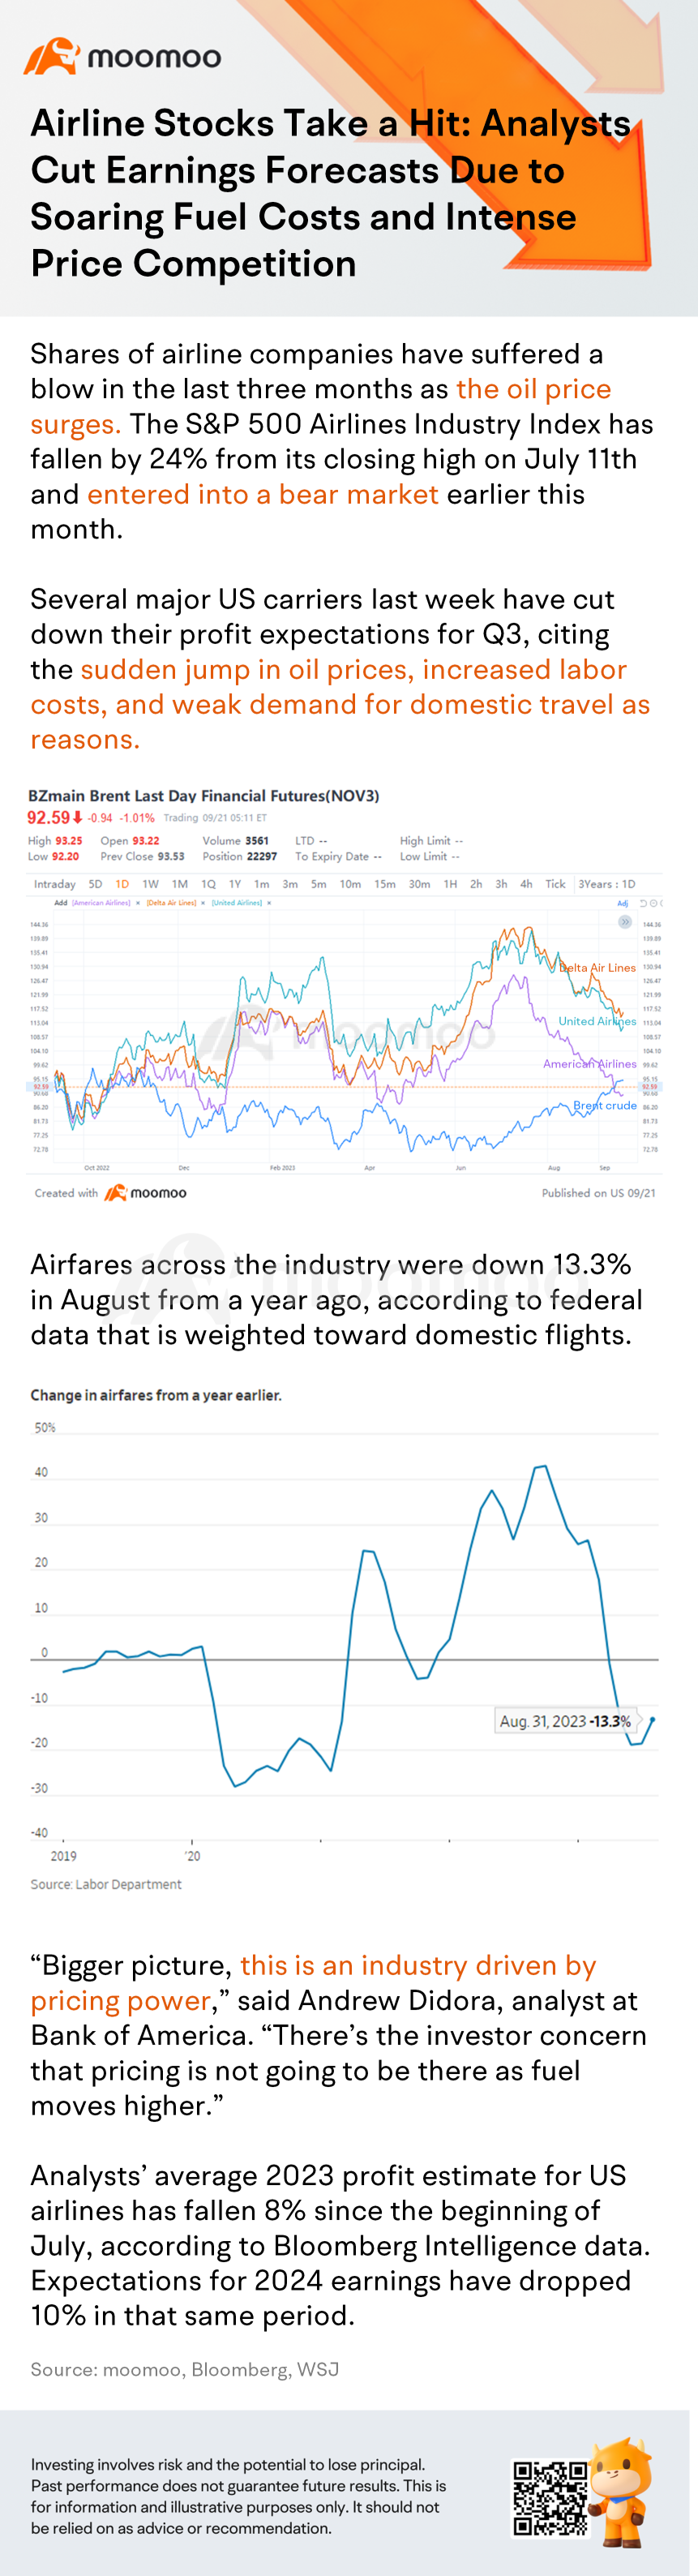 Airline Stocks Take a Hit: Analysts Cut Earnings Forecasts Due to Soaring Fuel Costs and Intense Price Competition